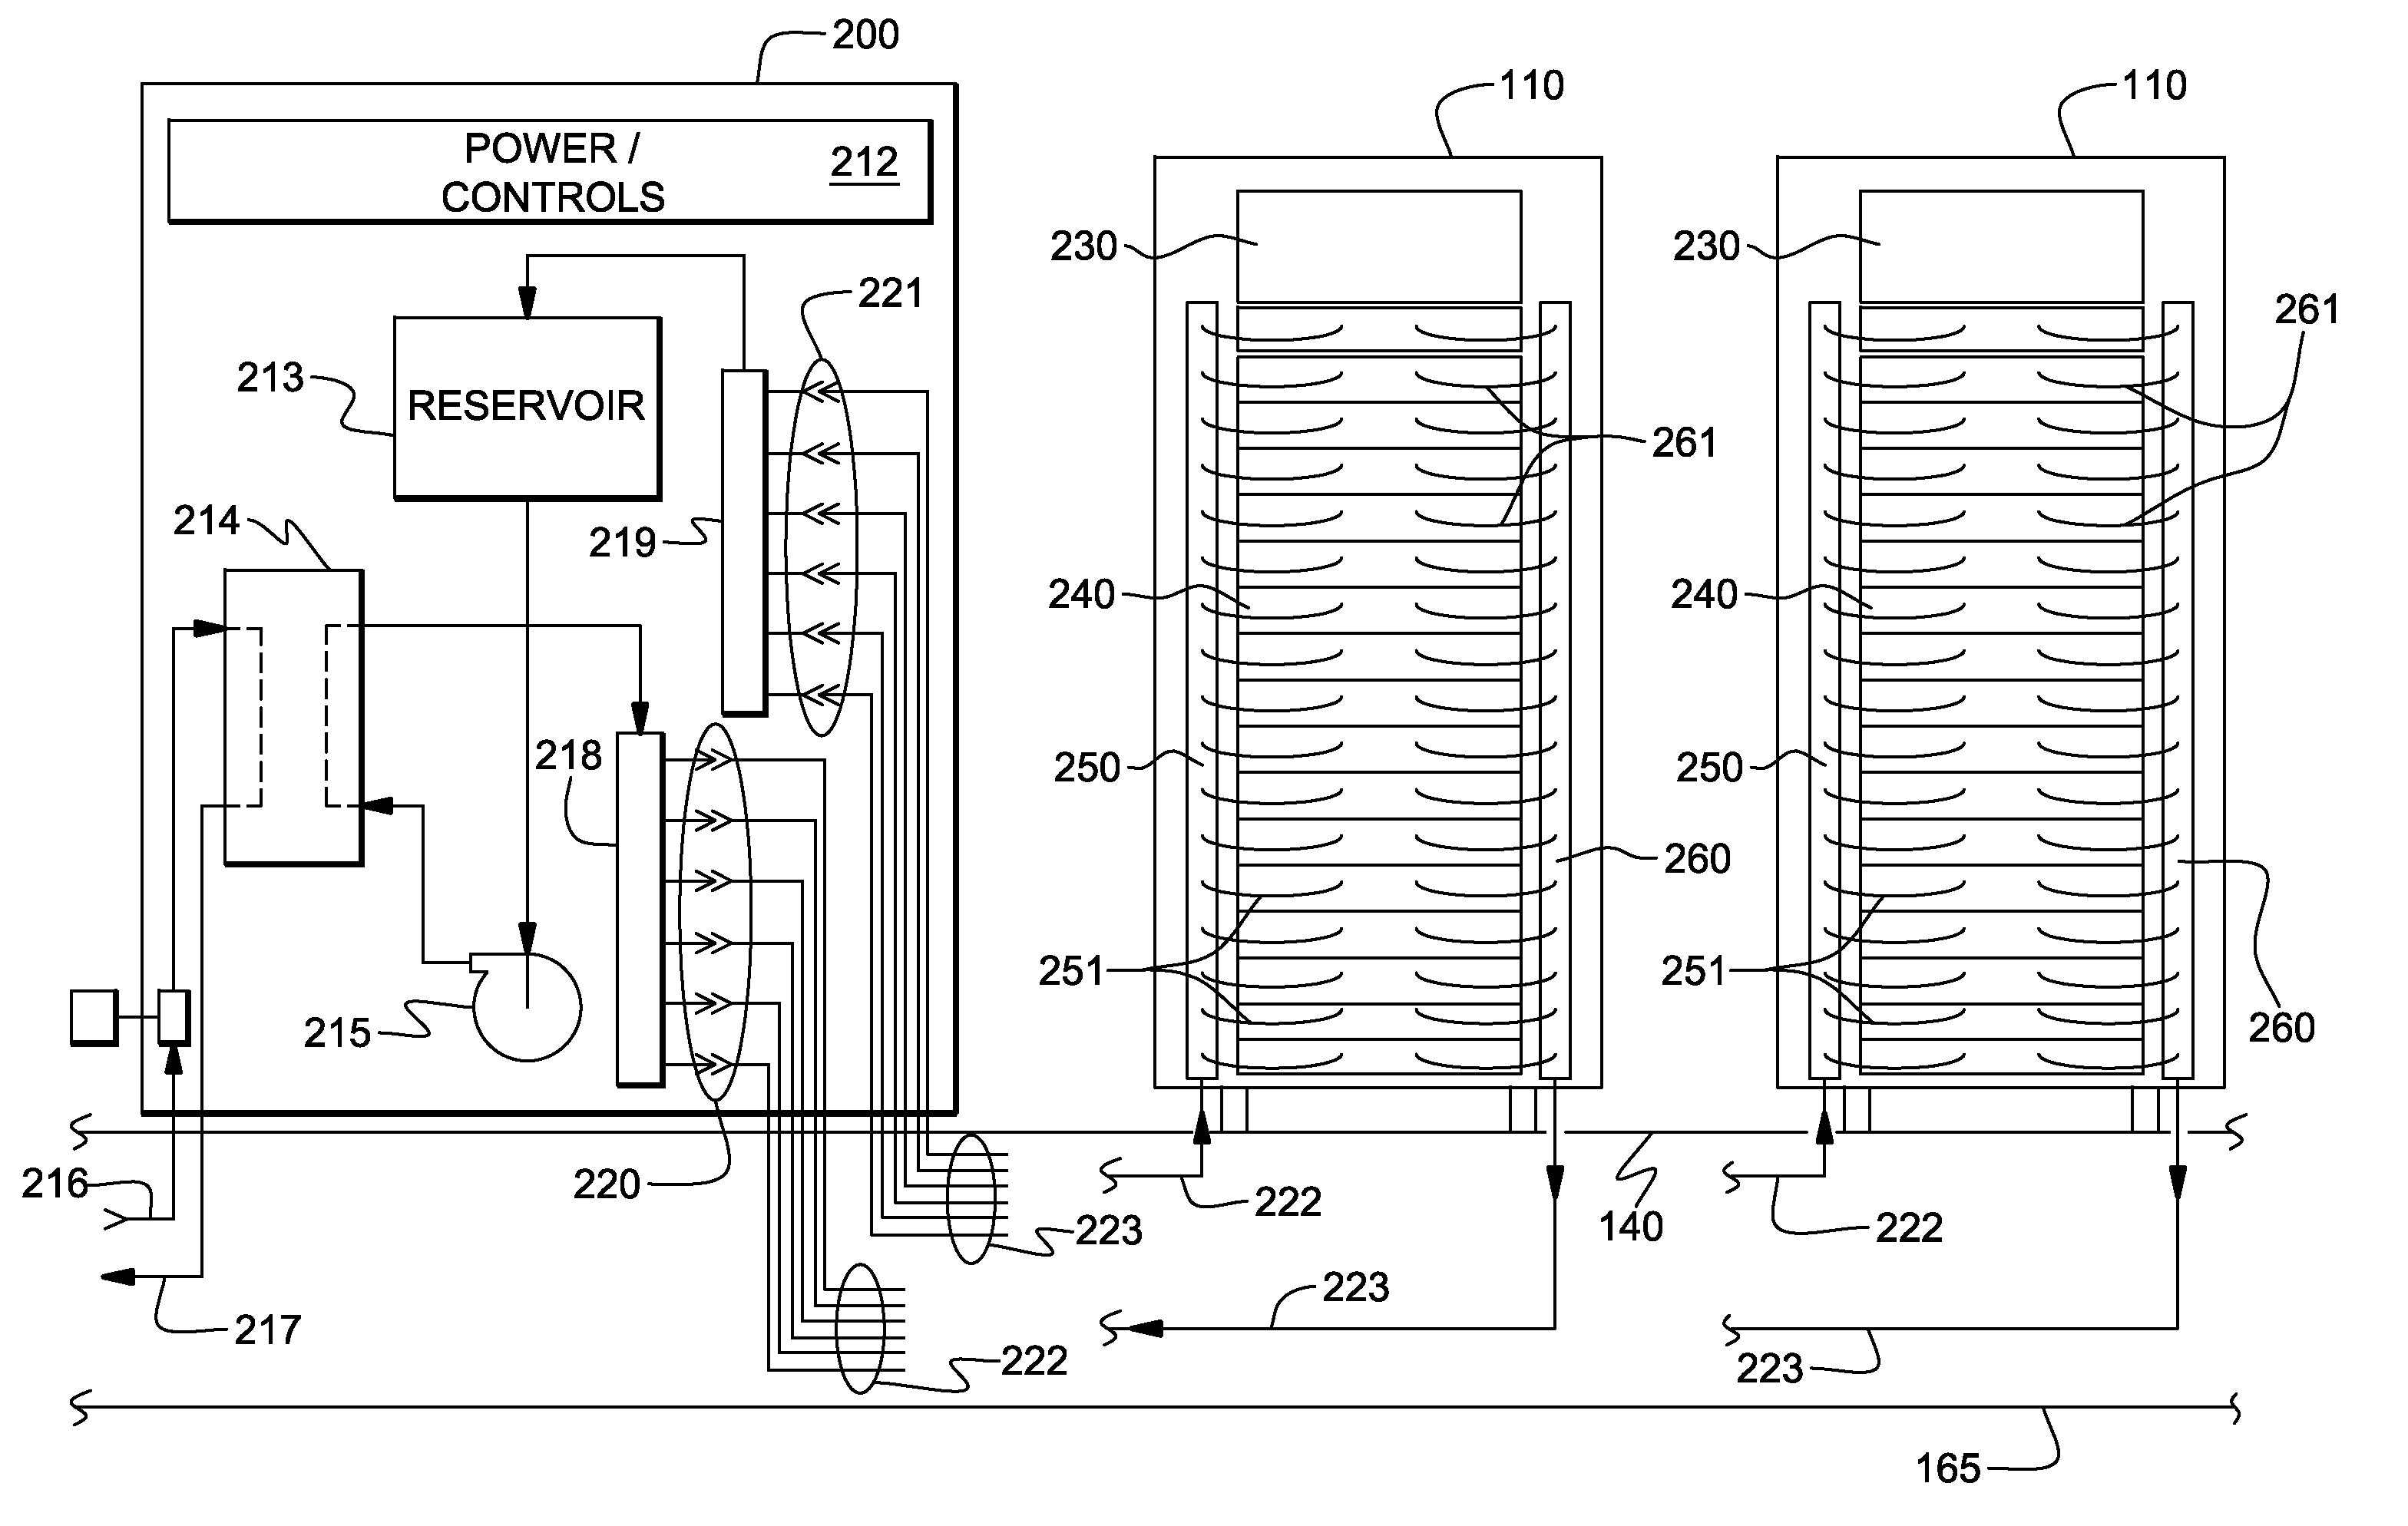 Cooled electronic module with pump-enhanced, dielectric fluid immersion-cooling